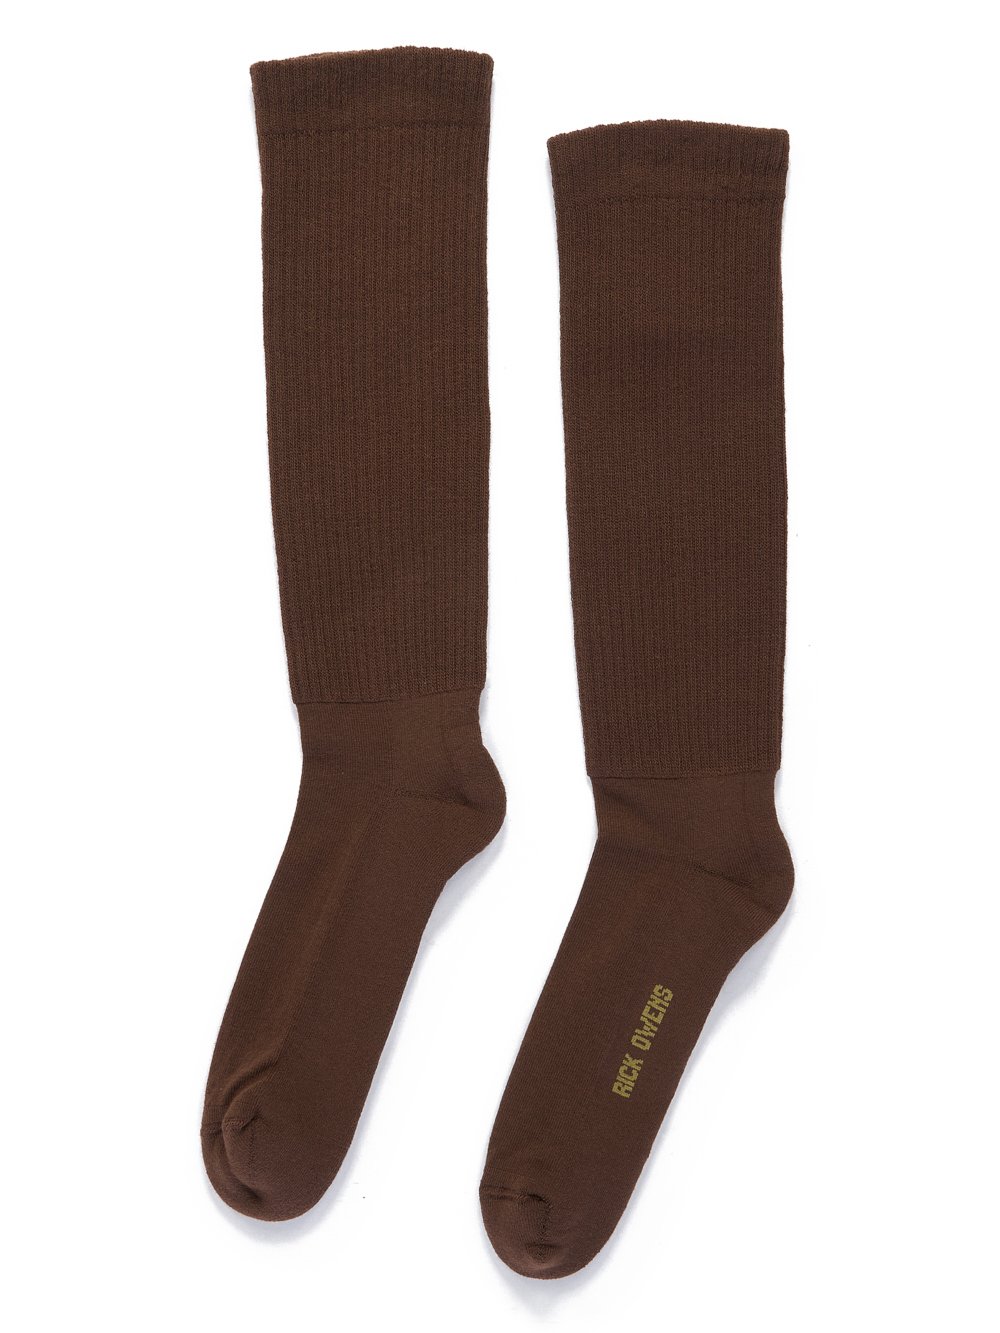 RICK OWENS FW23 LUXOR MID CALF SOCKS IN BROWN AND ACID COTTON KNIT